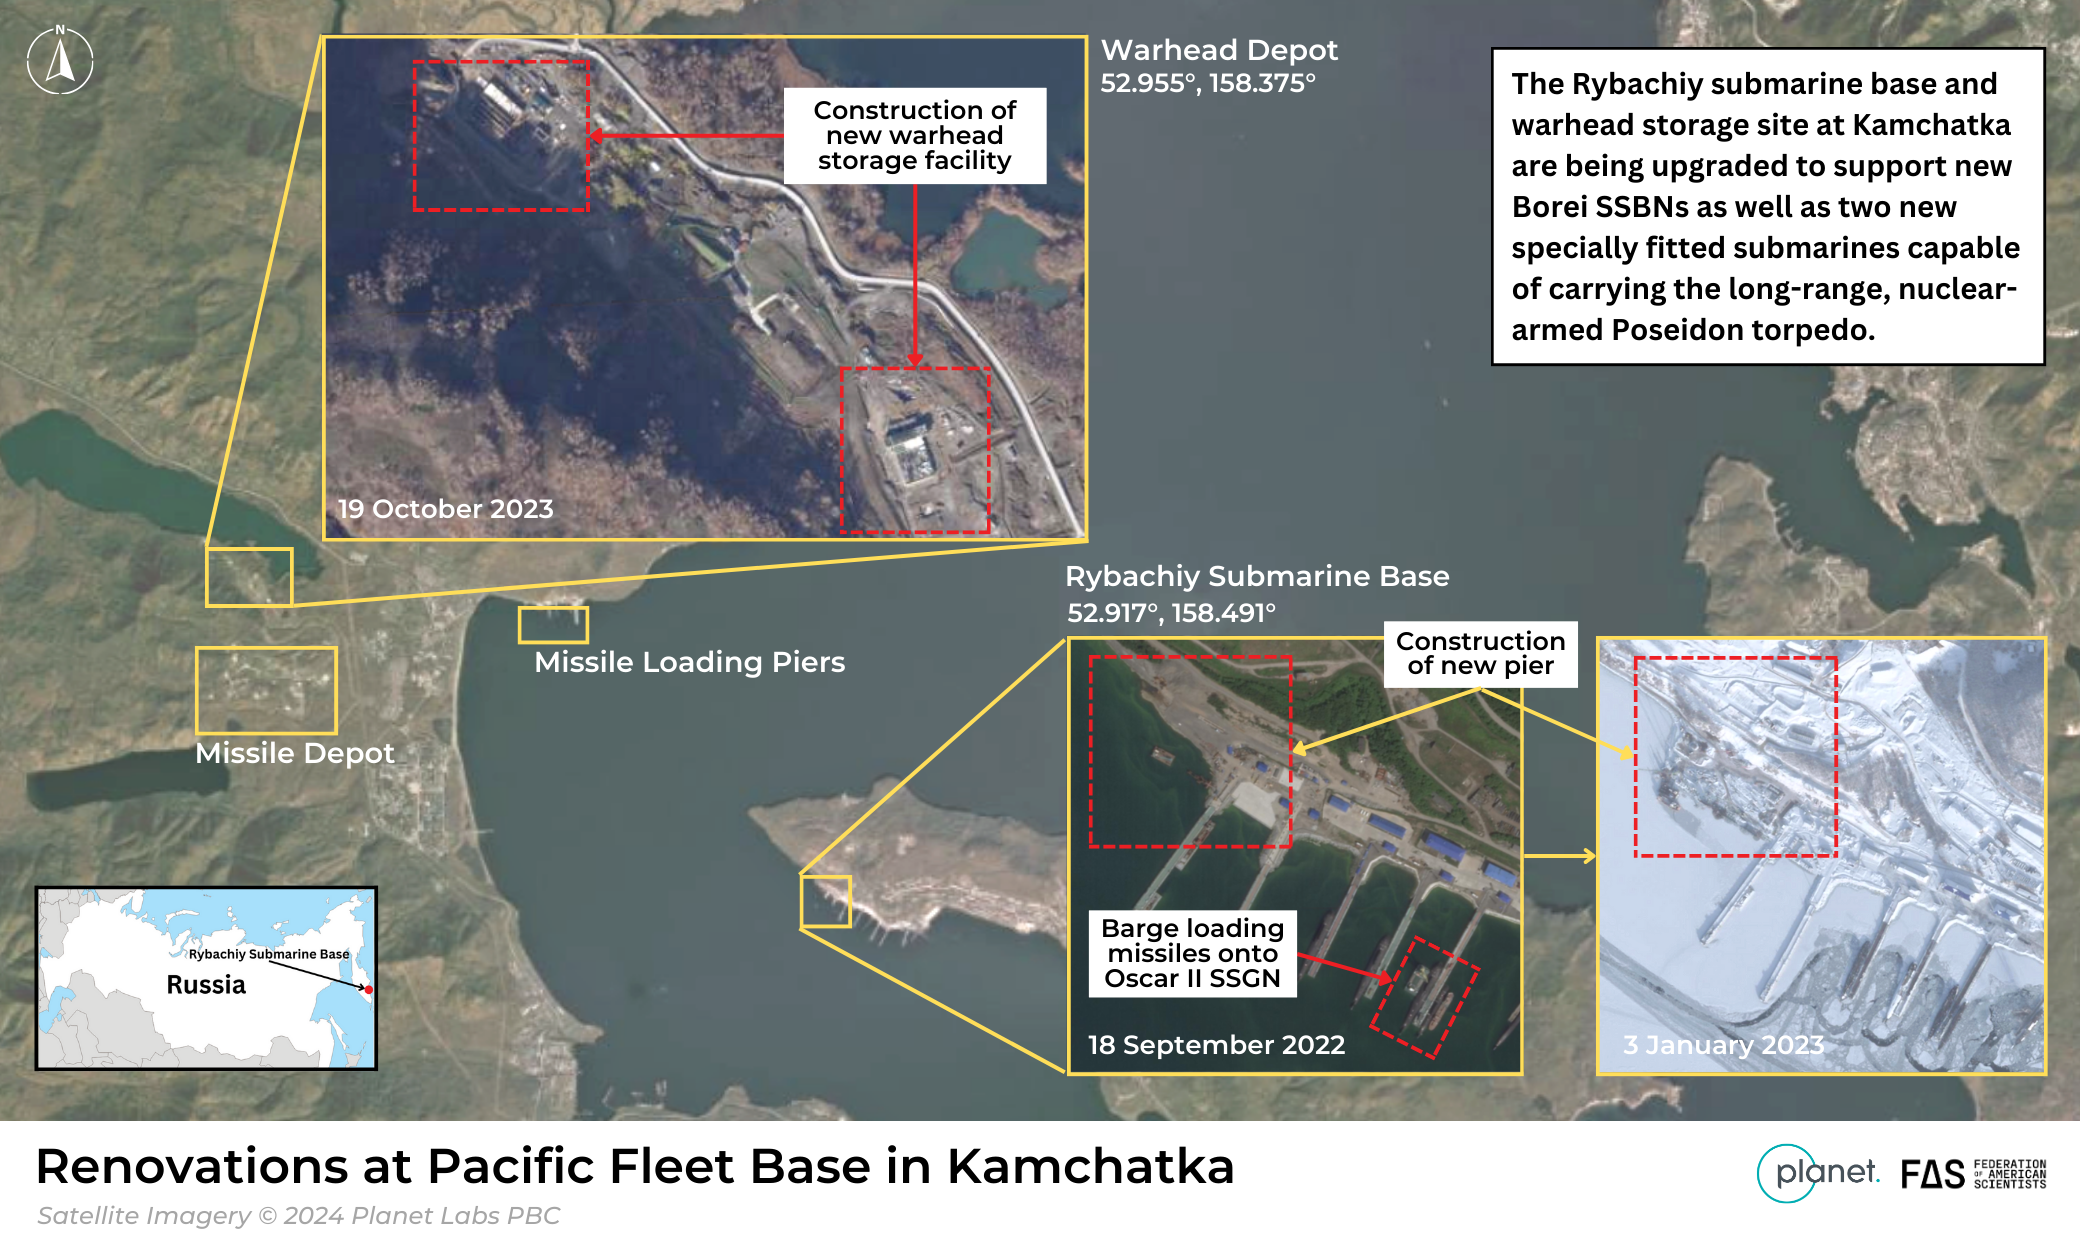 The Rybachiy submarine base and warhead storage site at Kamchatka are being upgraded to support new Borei SSBNs as well as two new specially fitted submarines capable of carrying the long-range, nuclear-armed Poseidon torpedo.